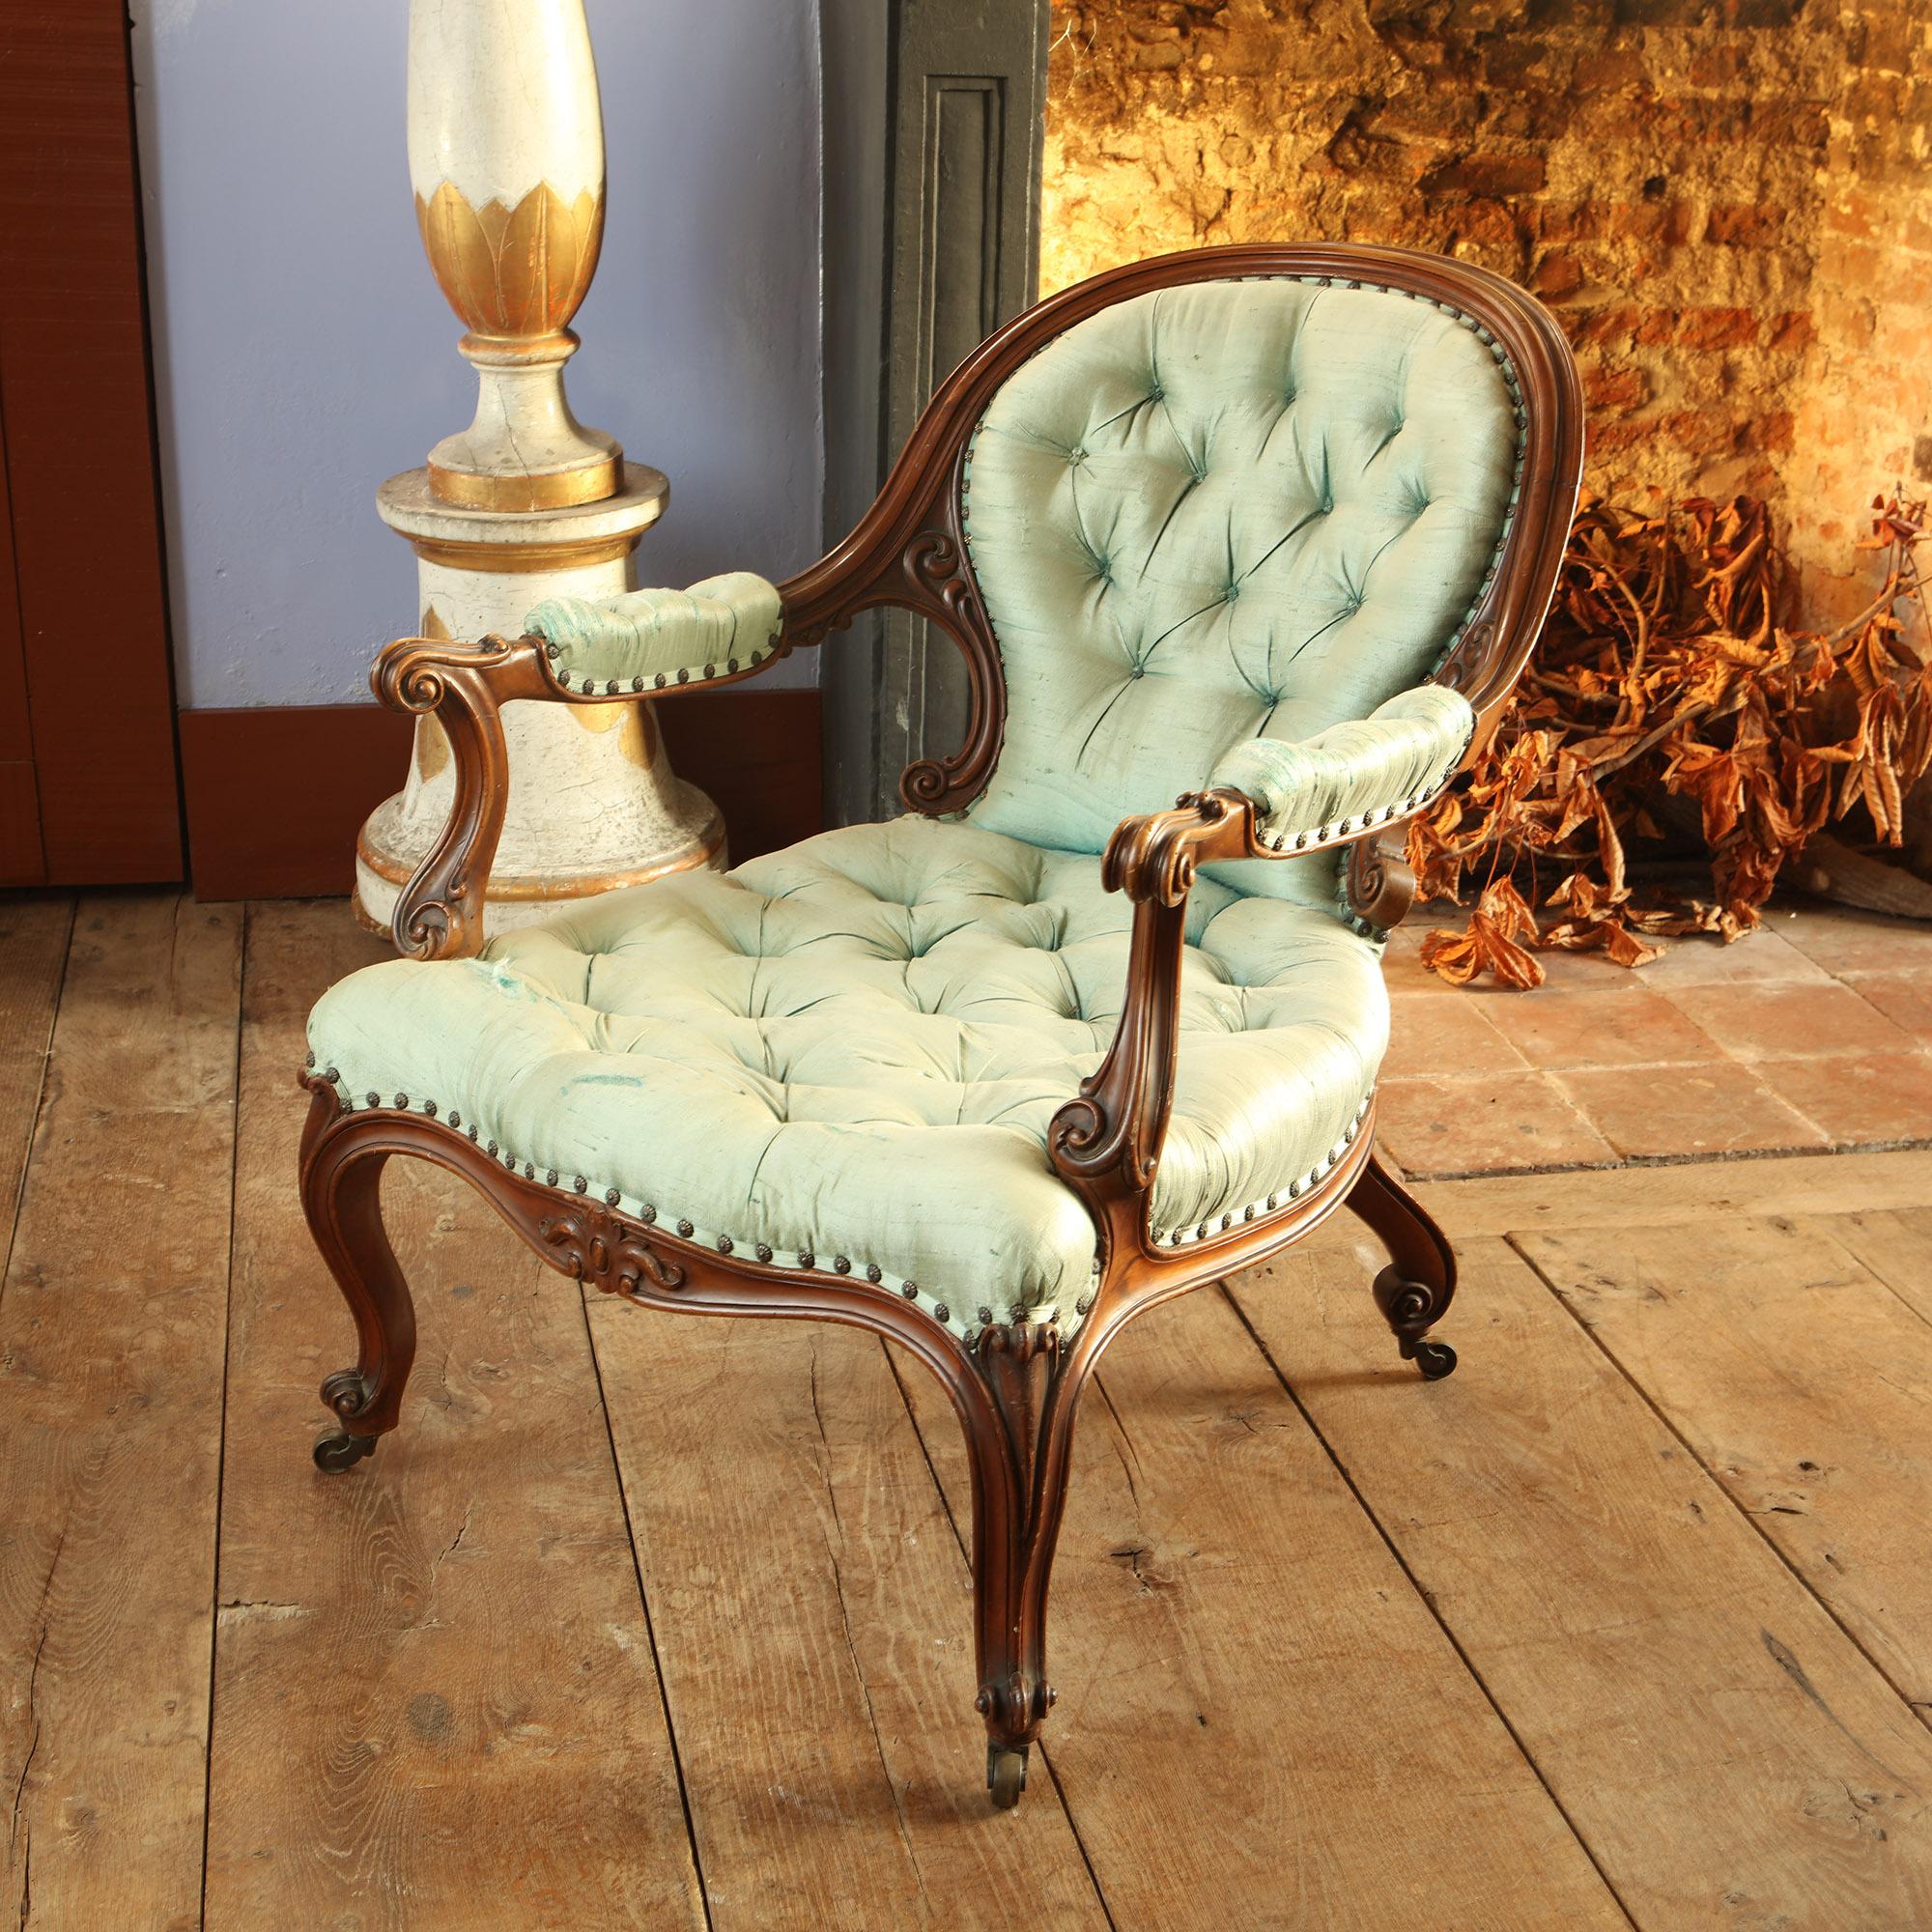 A hghly sculptural Victorian upholstered armchair - undoubtedly by an accomplished maker that we are continuing to research. A very elegant chair in good order, upholstered in blue silk by the current owner.